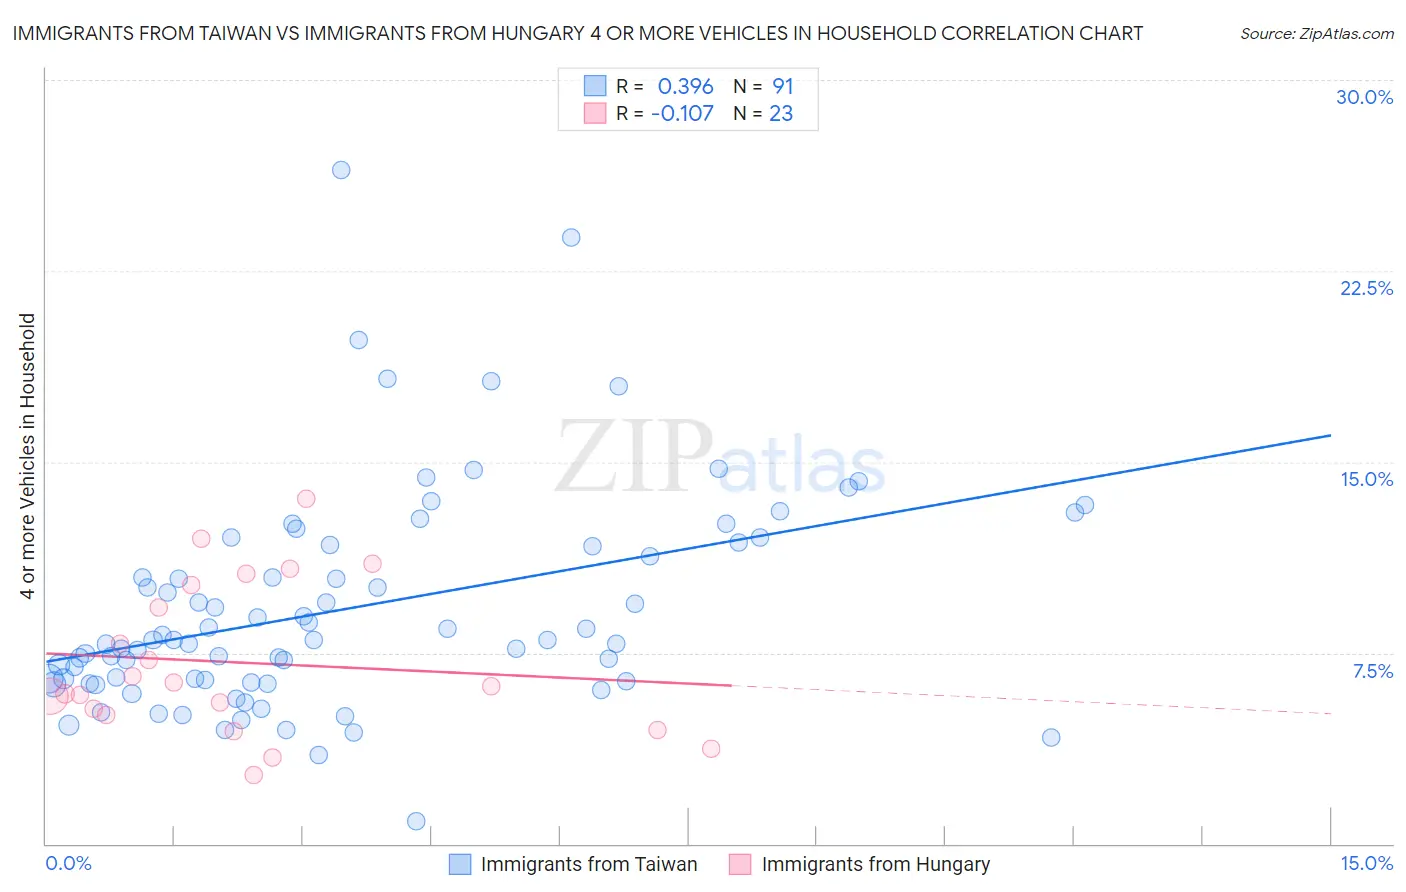 Immigrants from Taiwan vs Immigrants from Hungary 4 or more Vehicles in Household